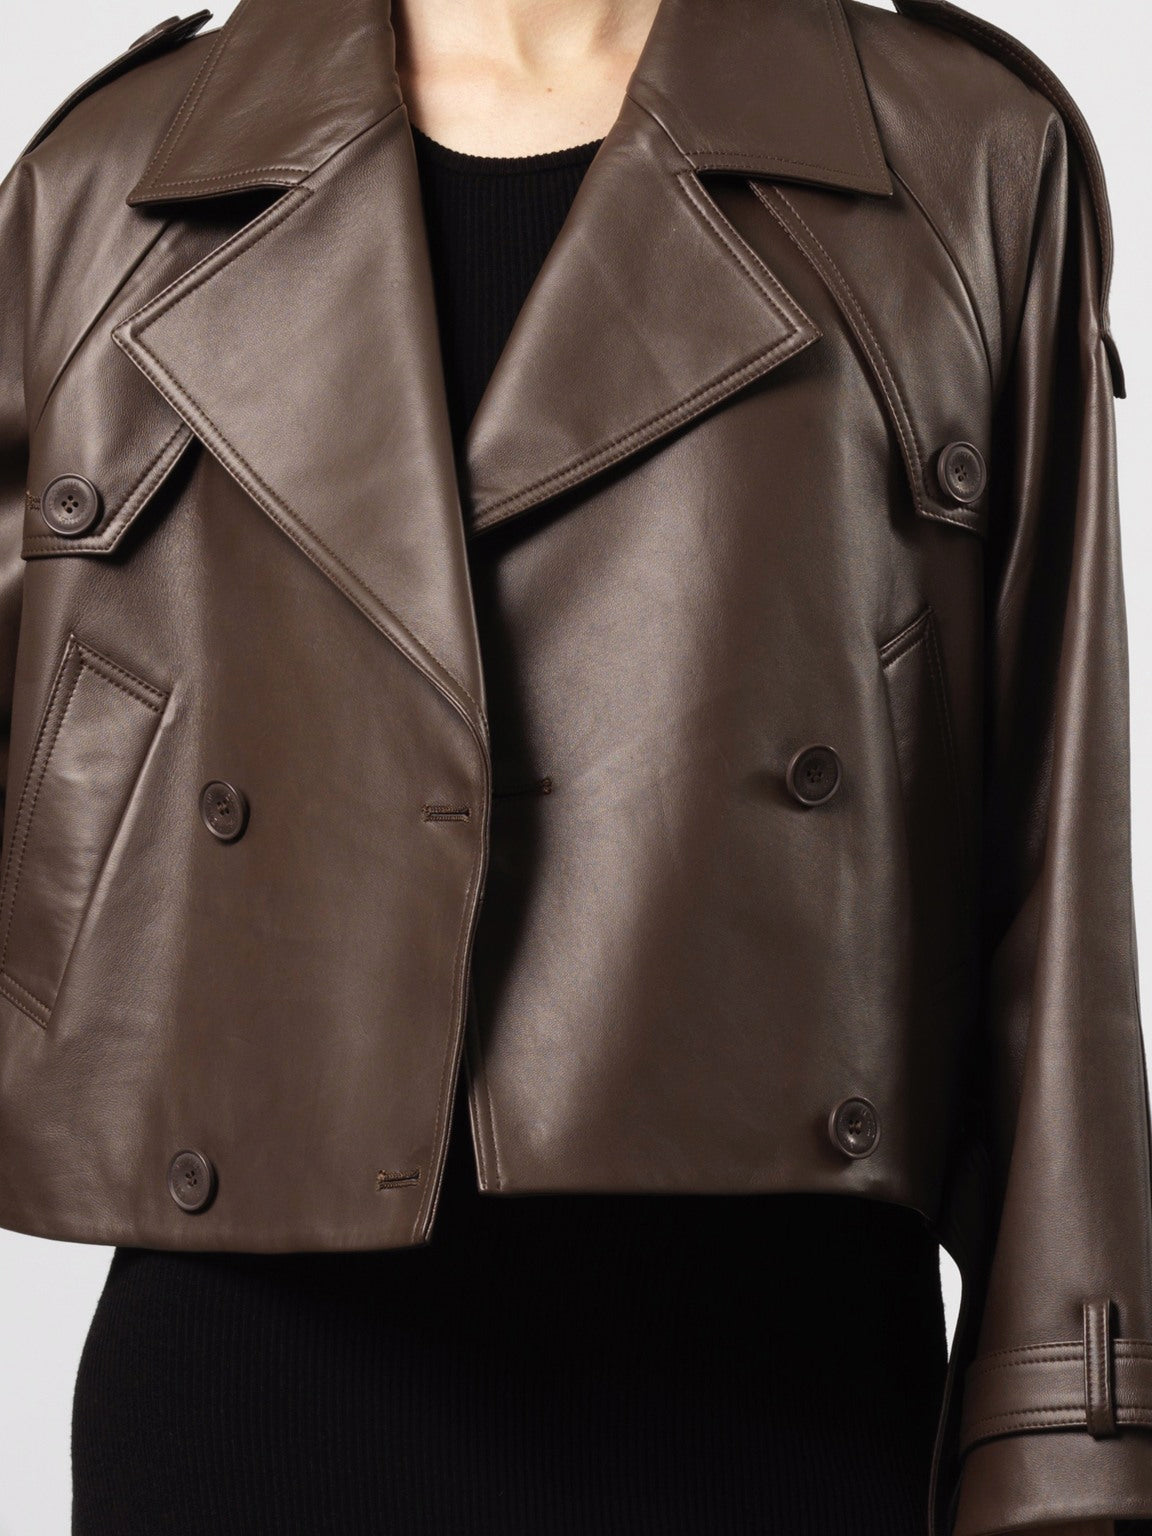 BOBBY LEATHER TRENCH JACKET - DARK BROWN